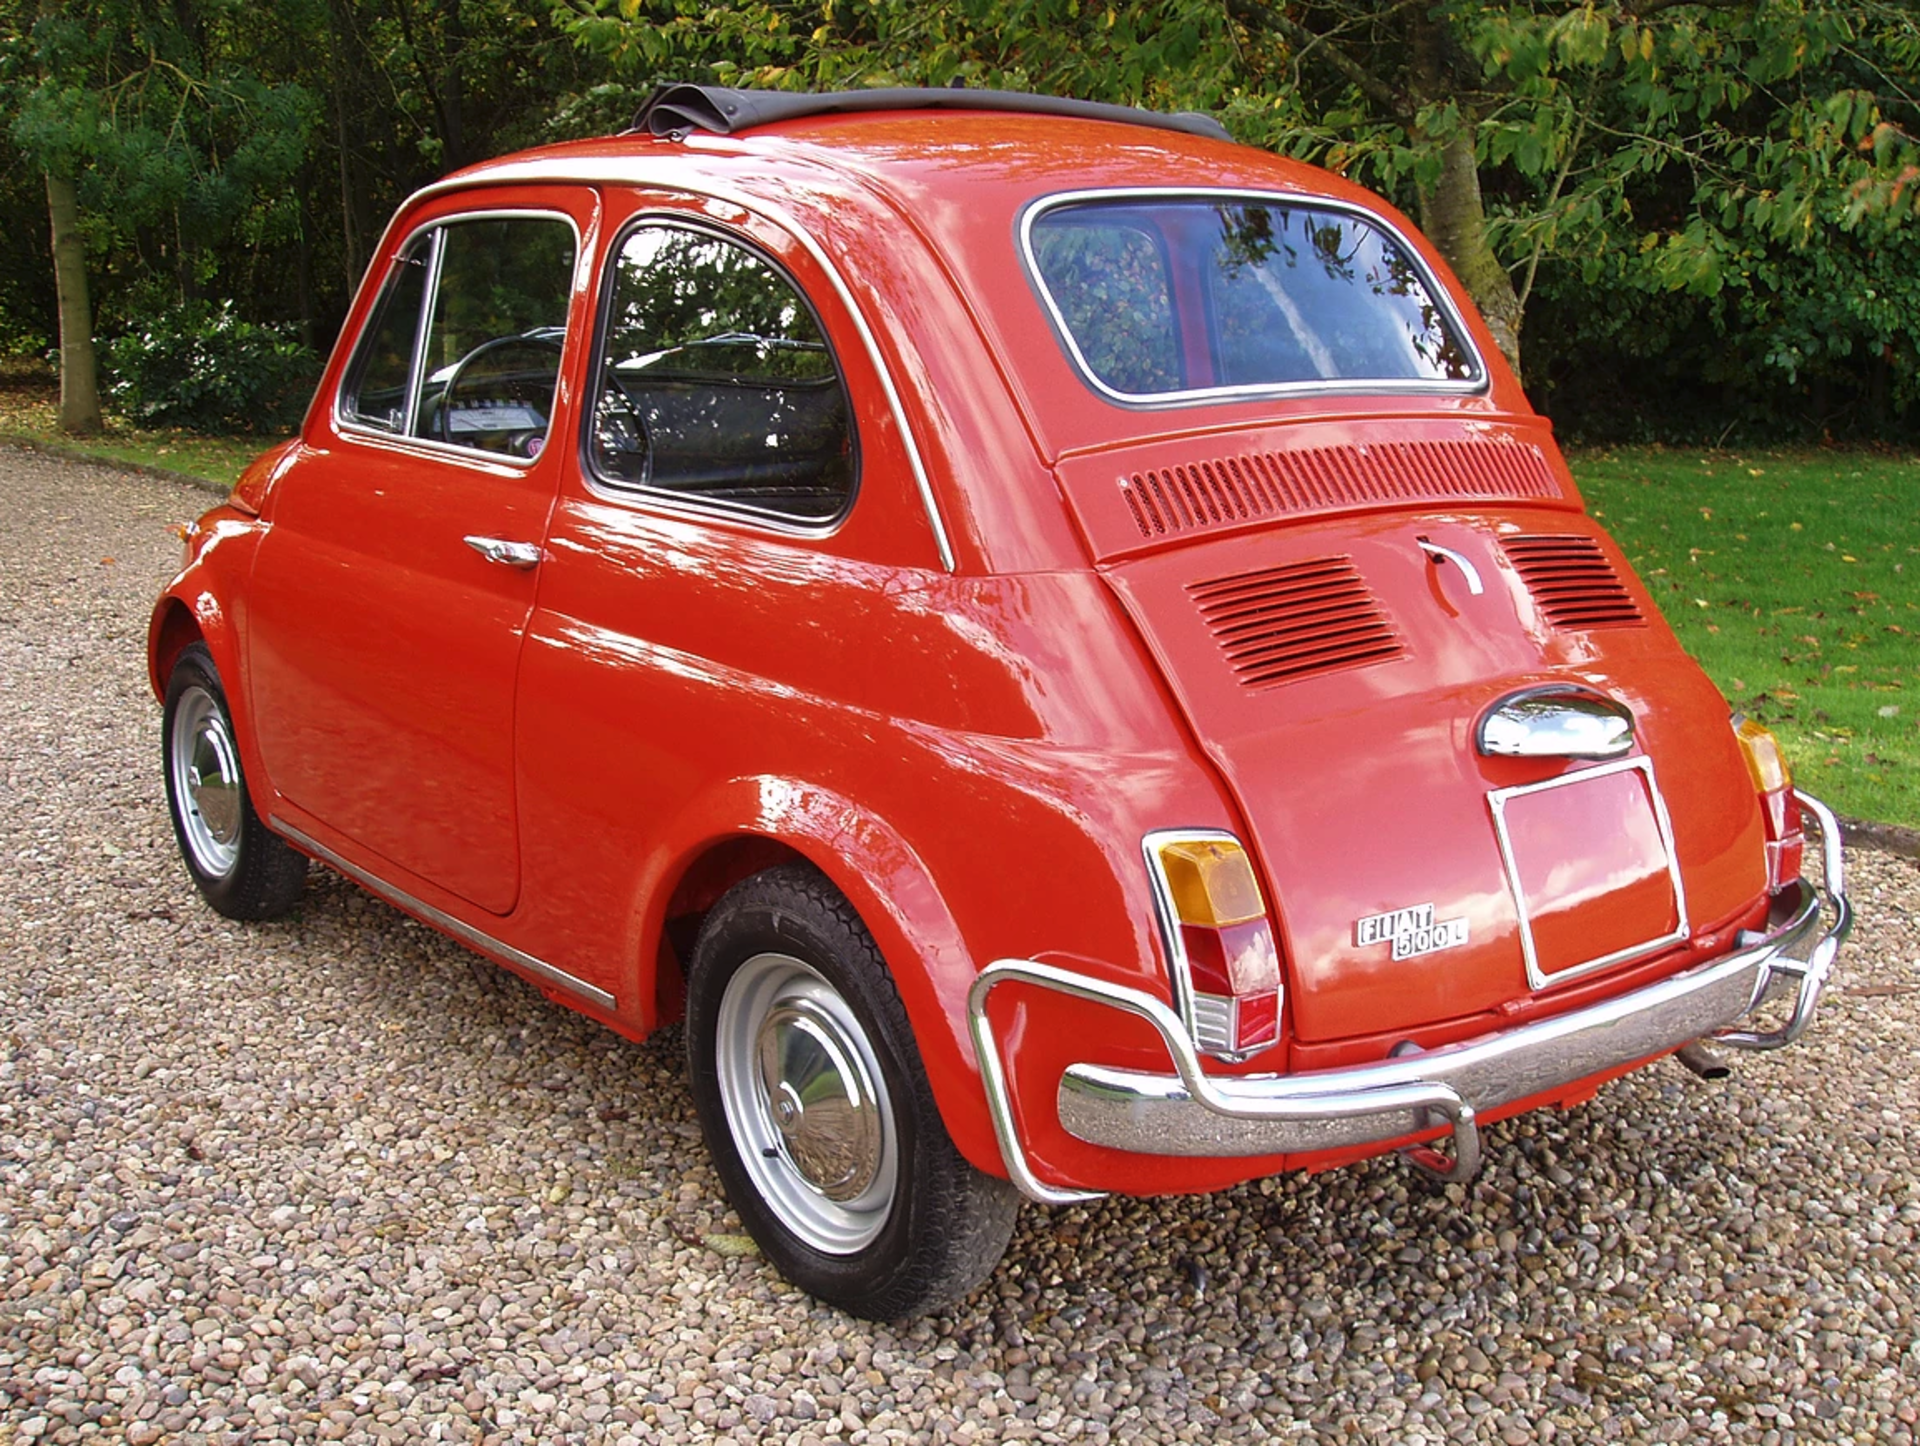 1970 Fiat 500 Lusso - Image 6 of 14